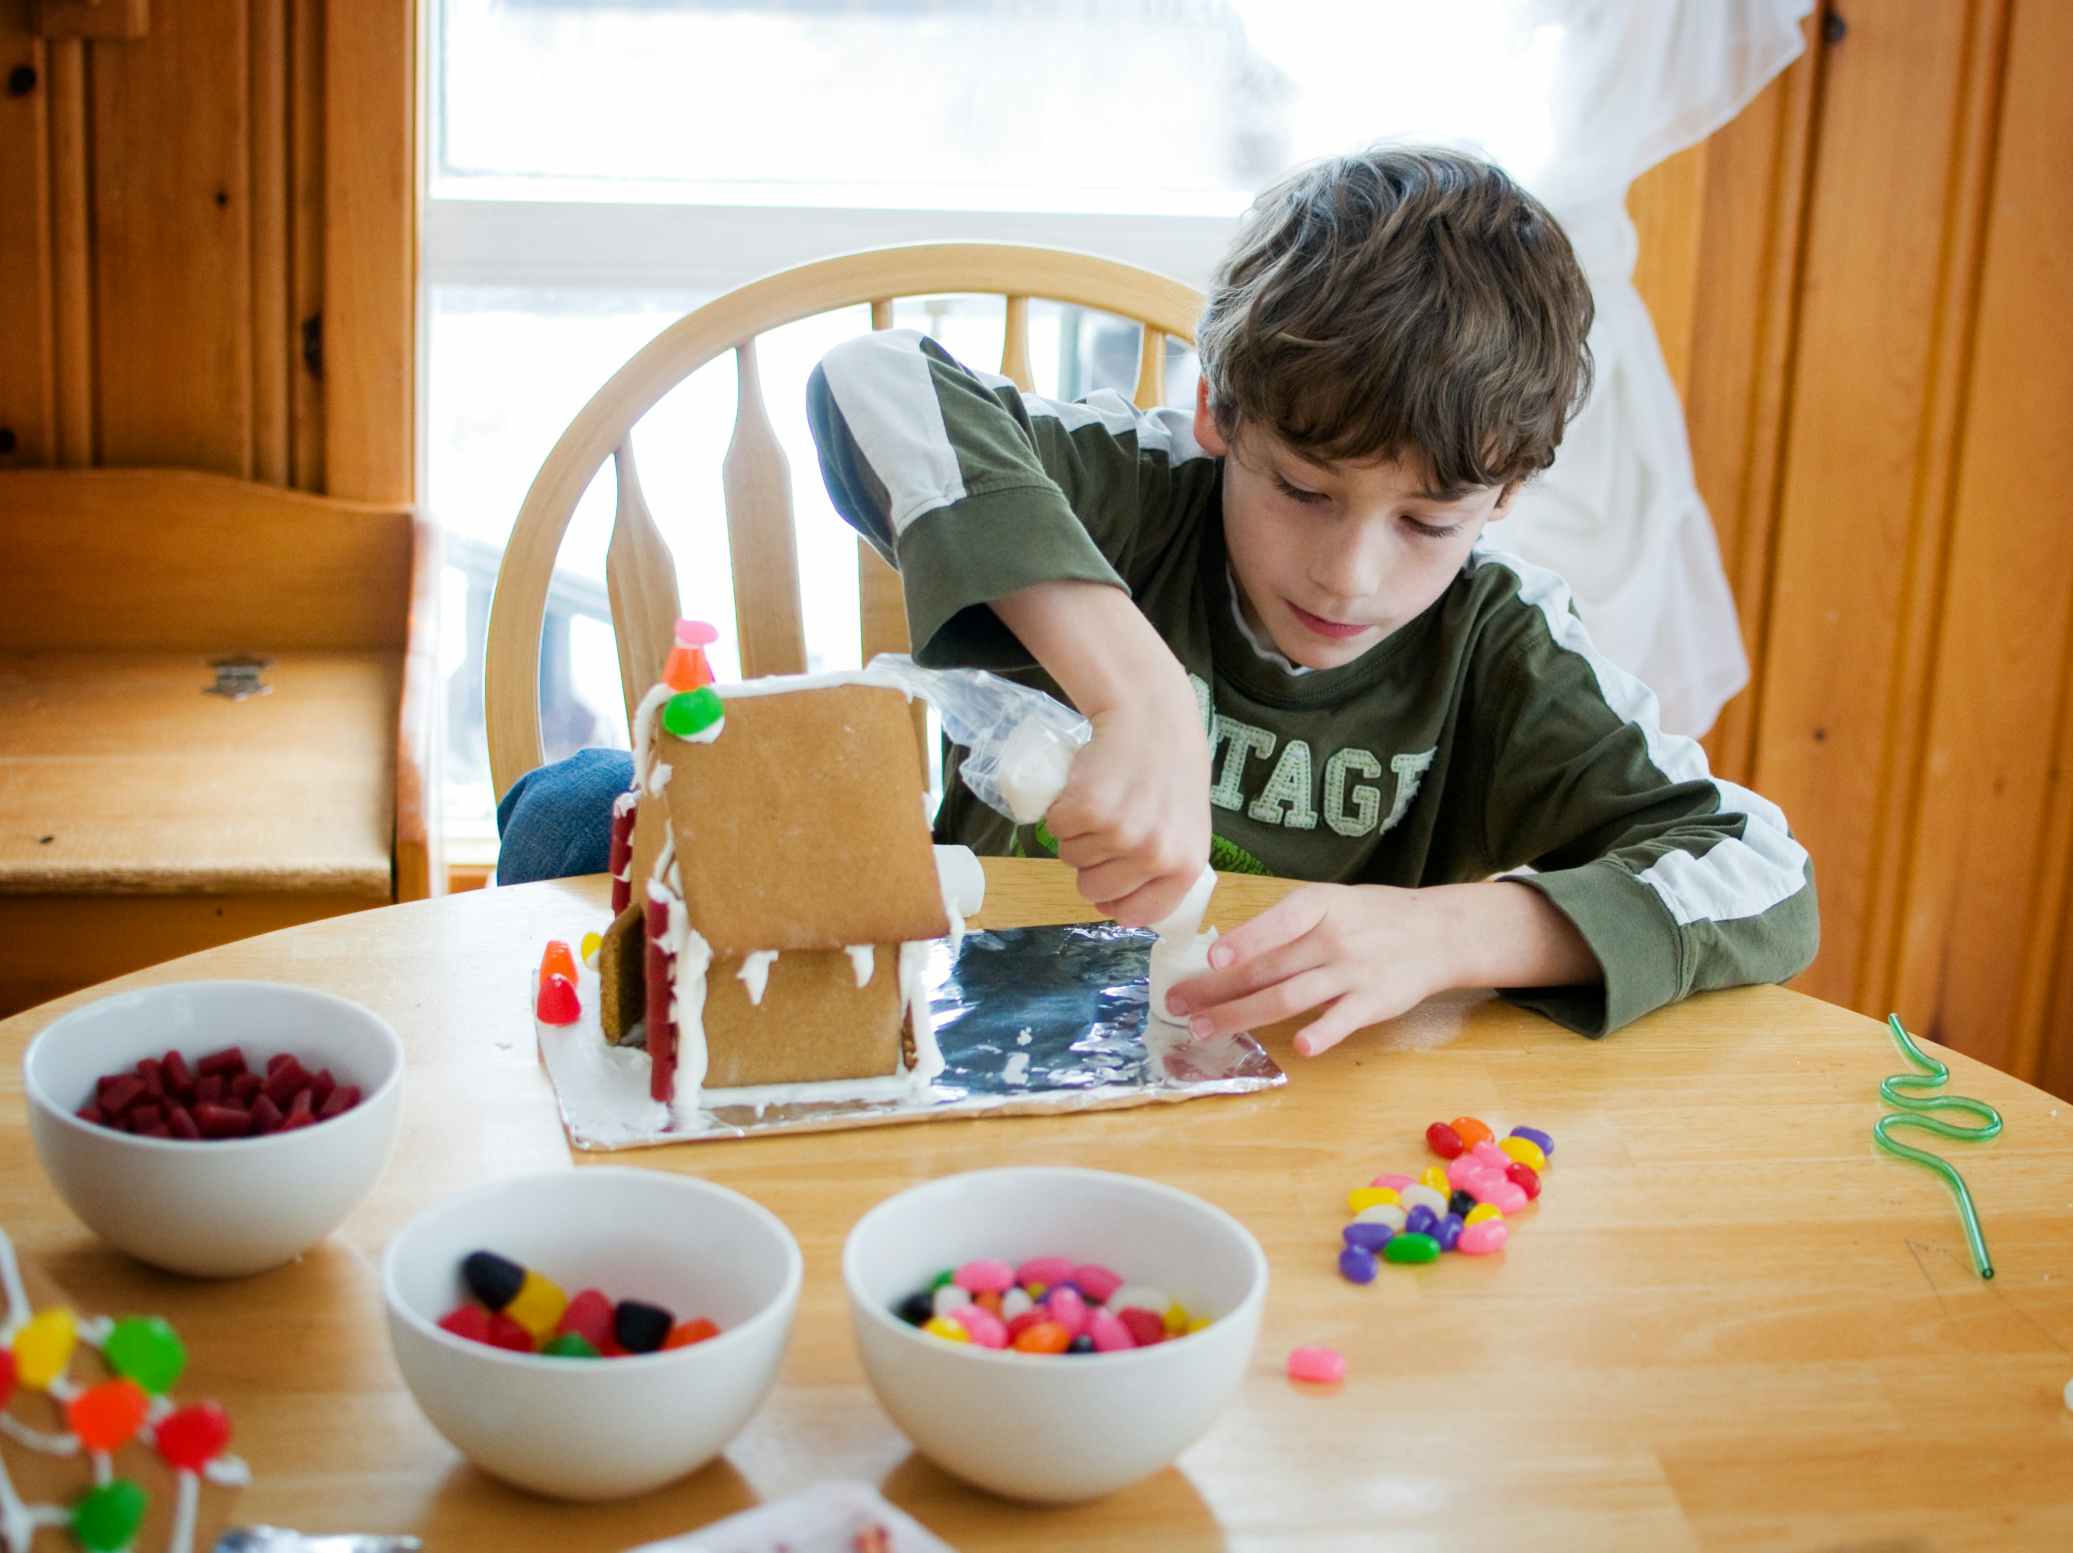 A young boy working on decorating a gingerbread house with bowls of different candies on the table.